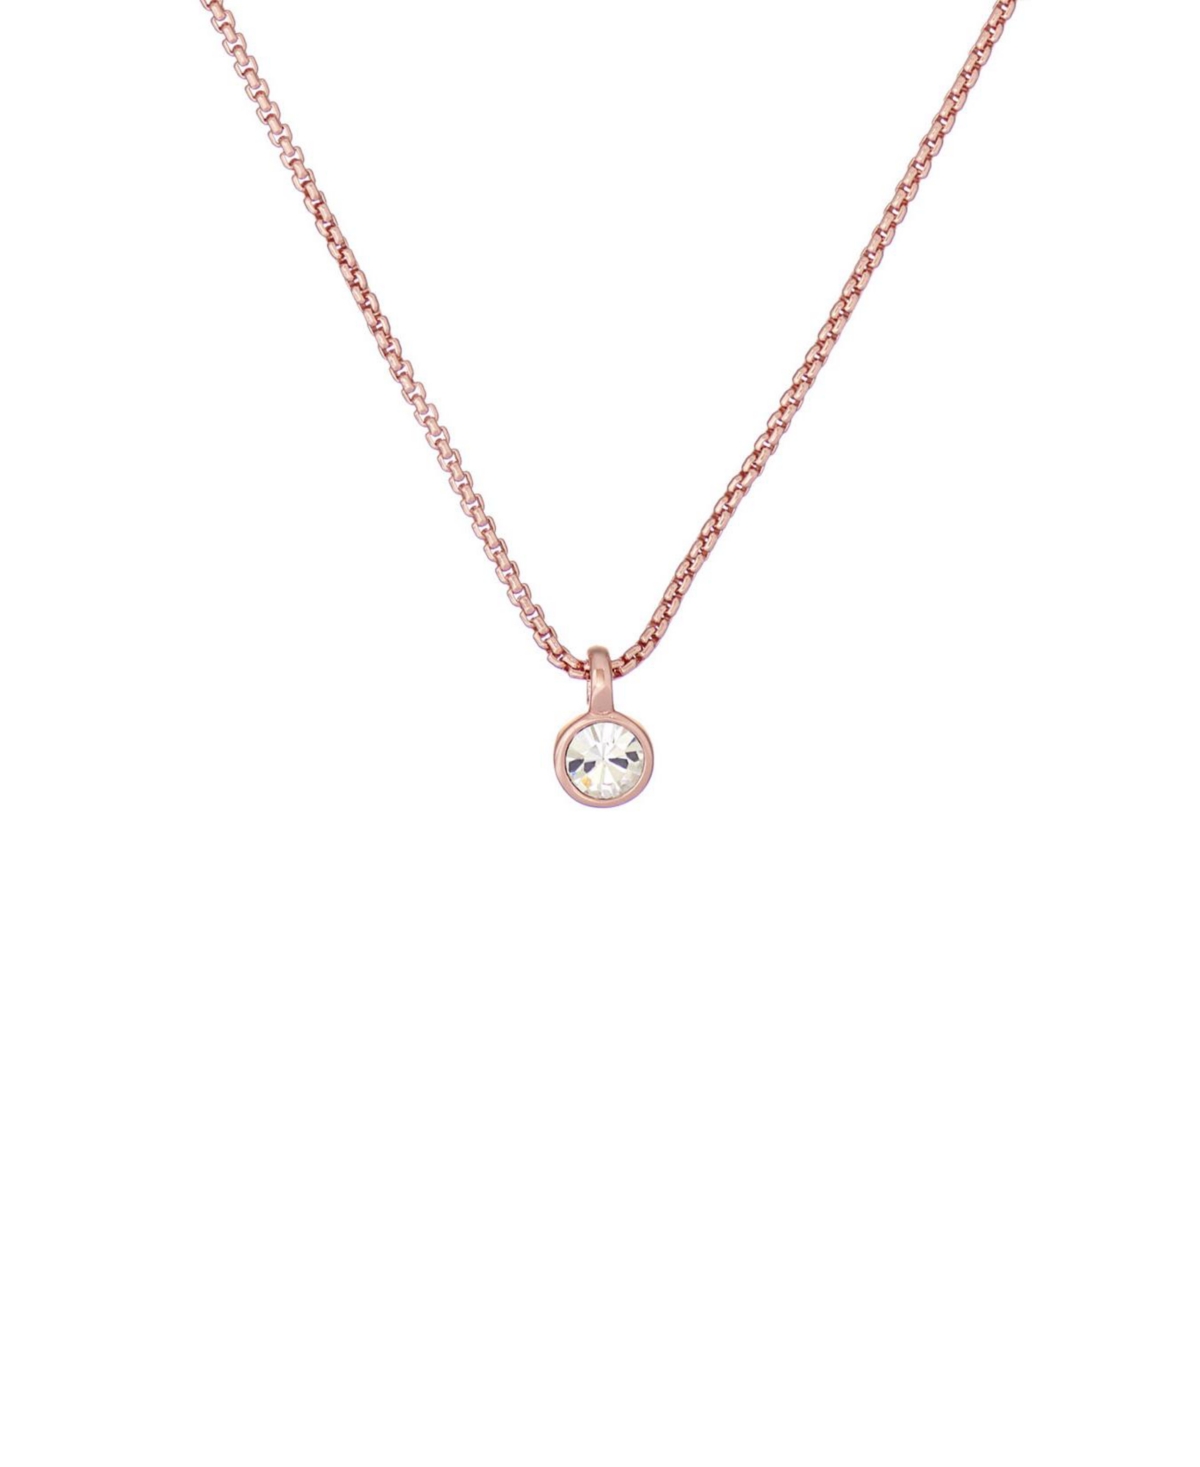 TED BAKER SININAA: CRYSTAL PENDANT NECKLACE FOR WOMEN